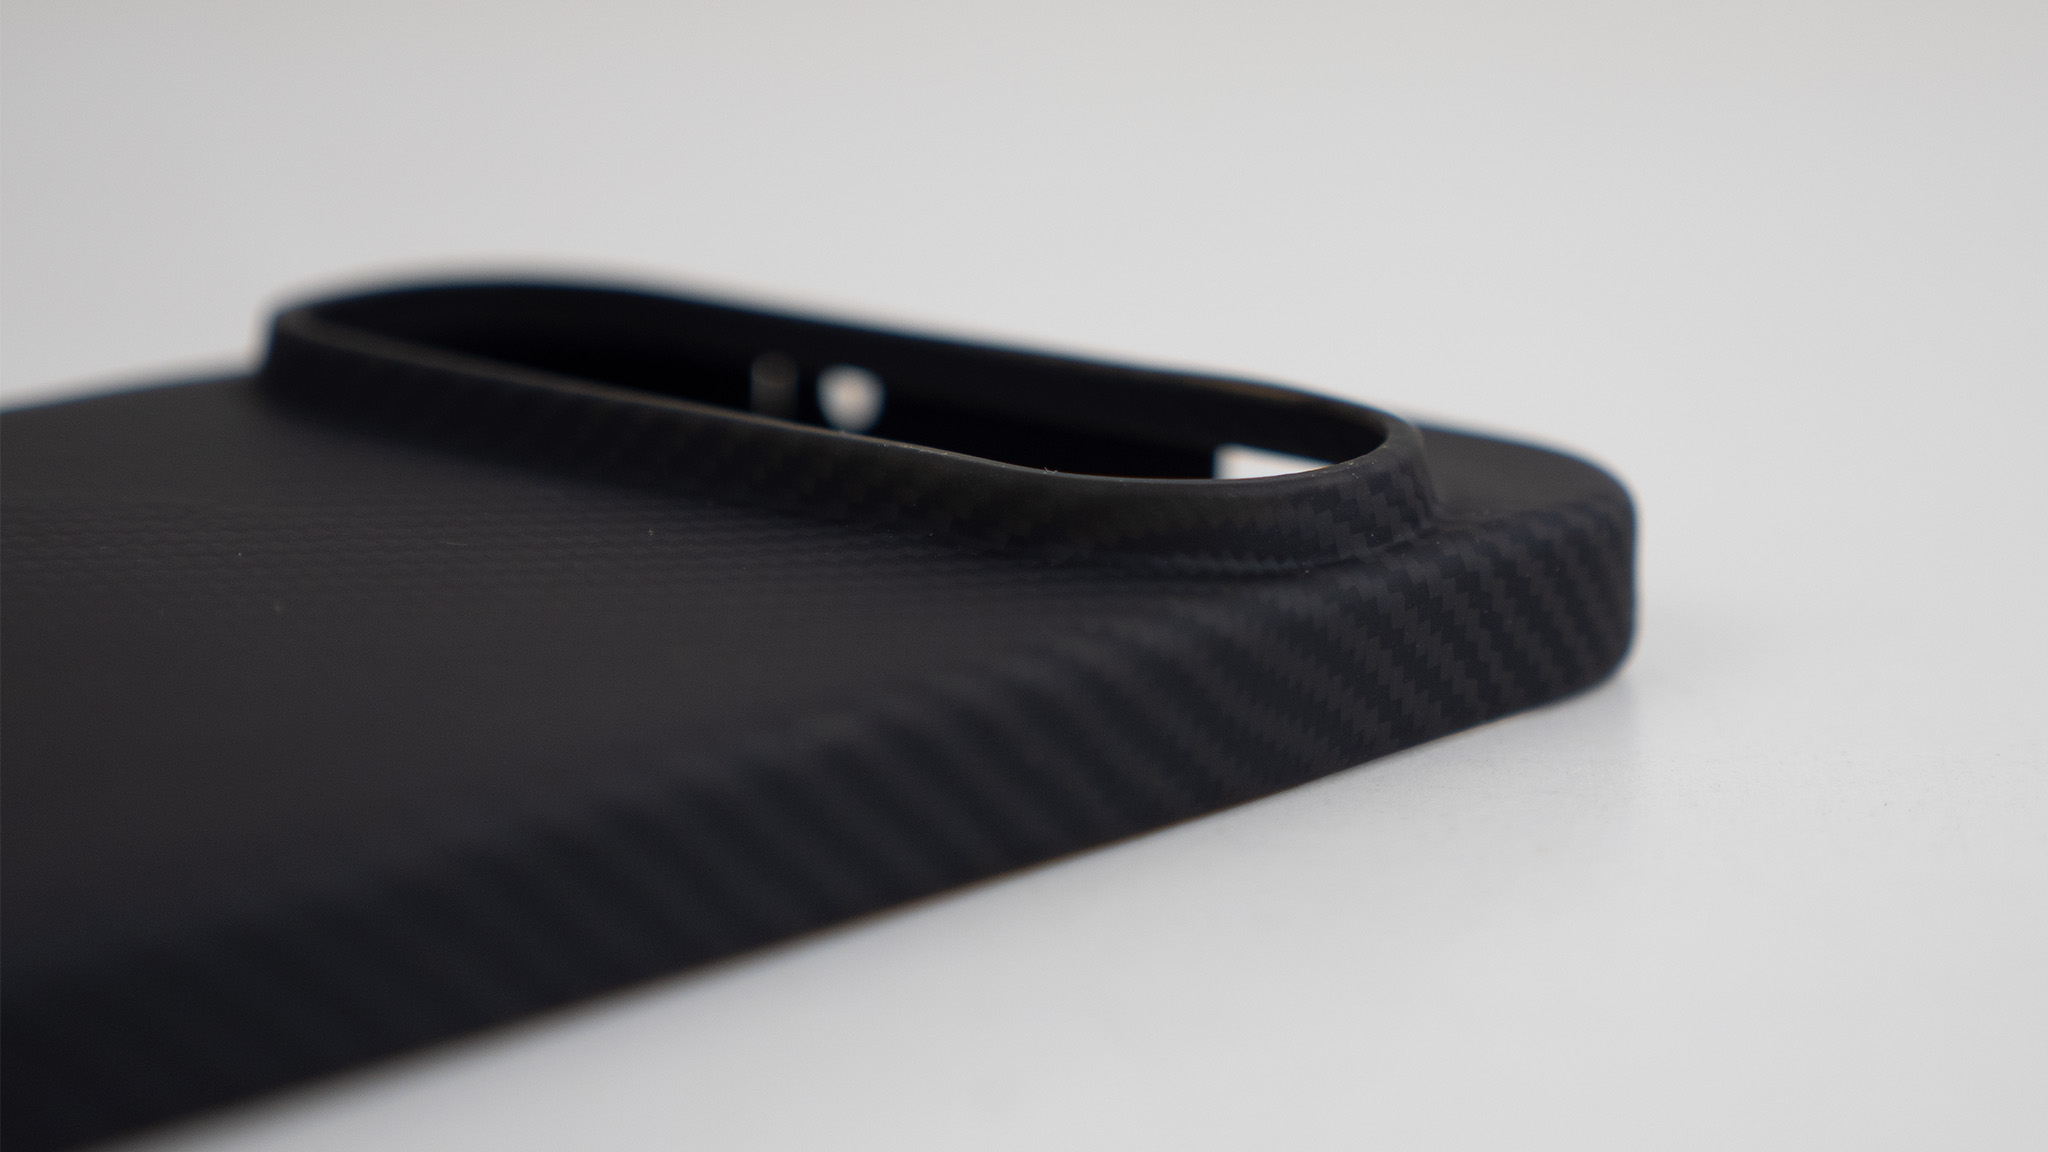 A Thinborne aramid fiber case made for an upcoming Google Pixel 9 phone